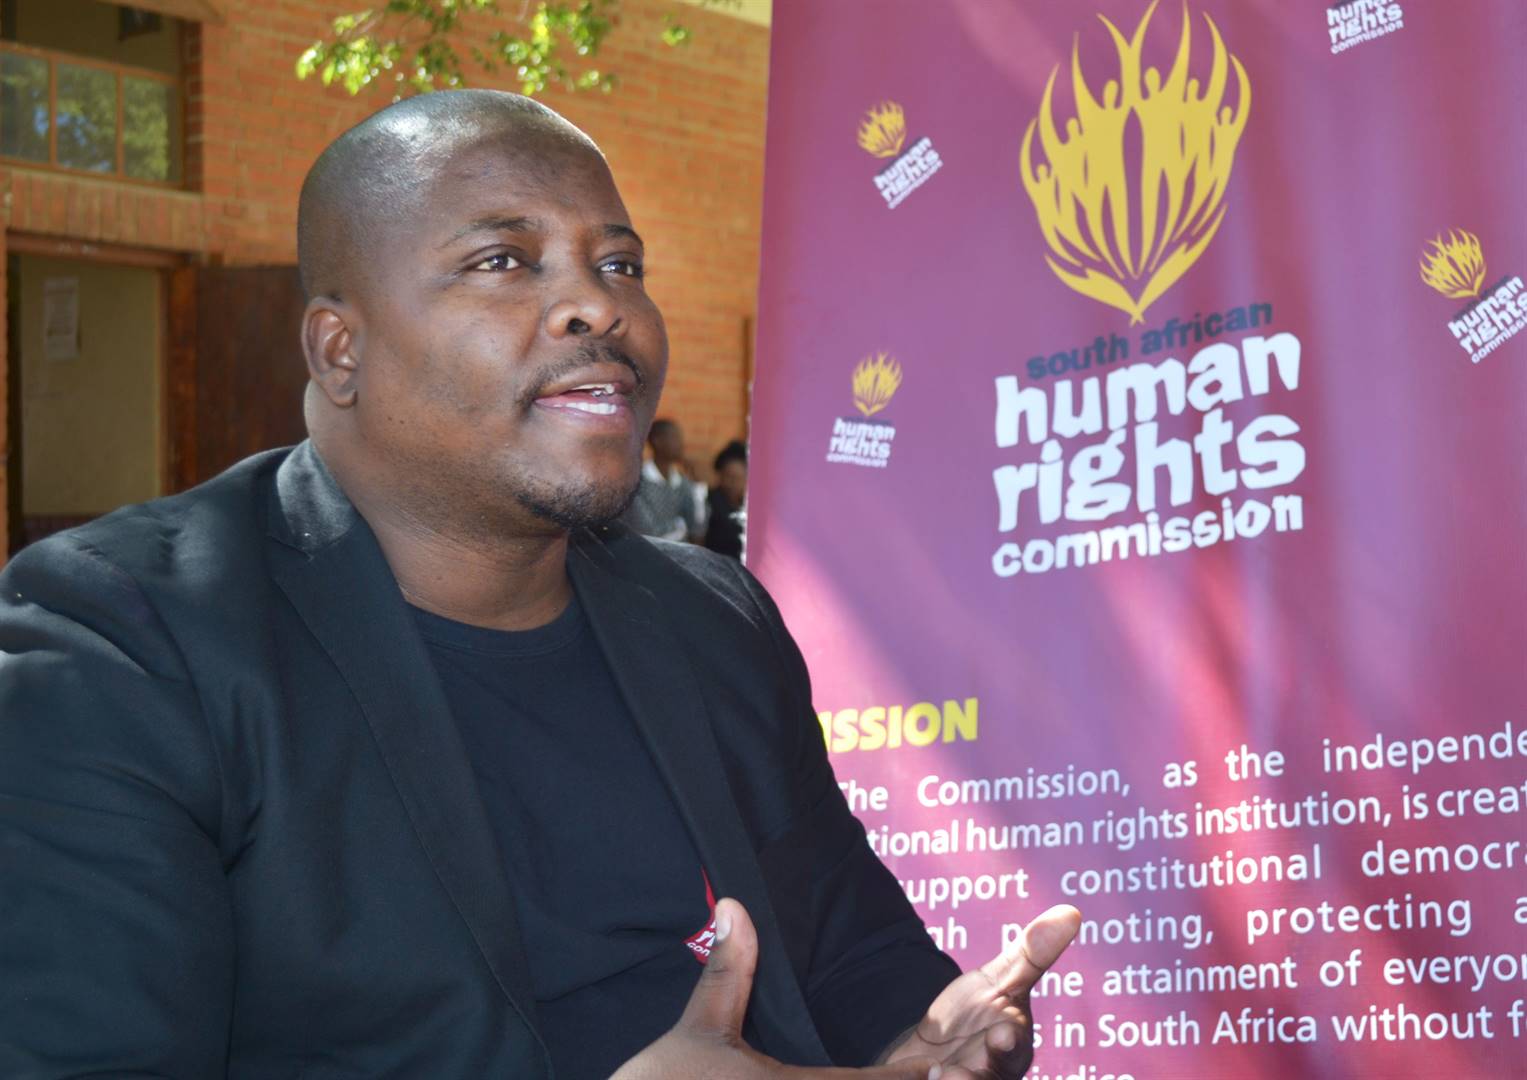 Thabang Kheswa, the Free State provincial manager of the South African Human Rights Commission. Picture: Palesa Dlamini